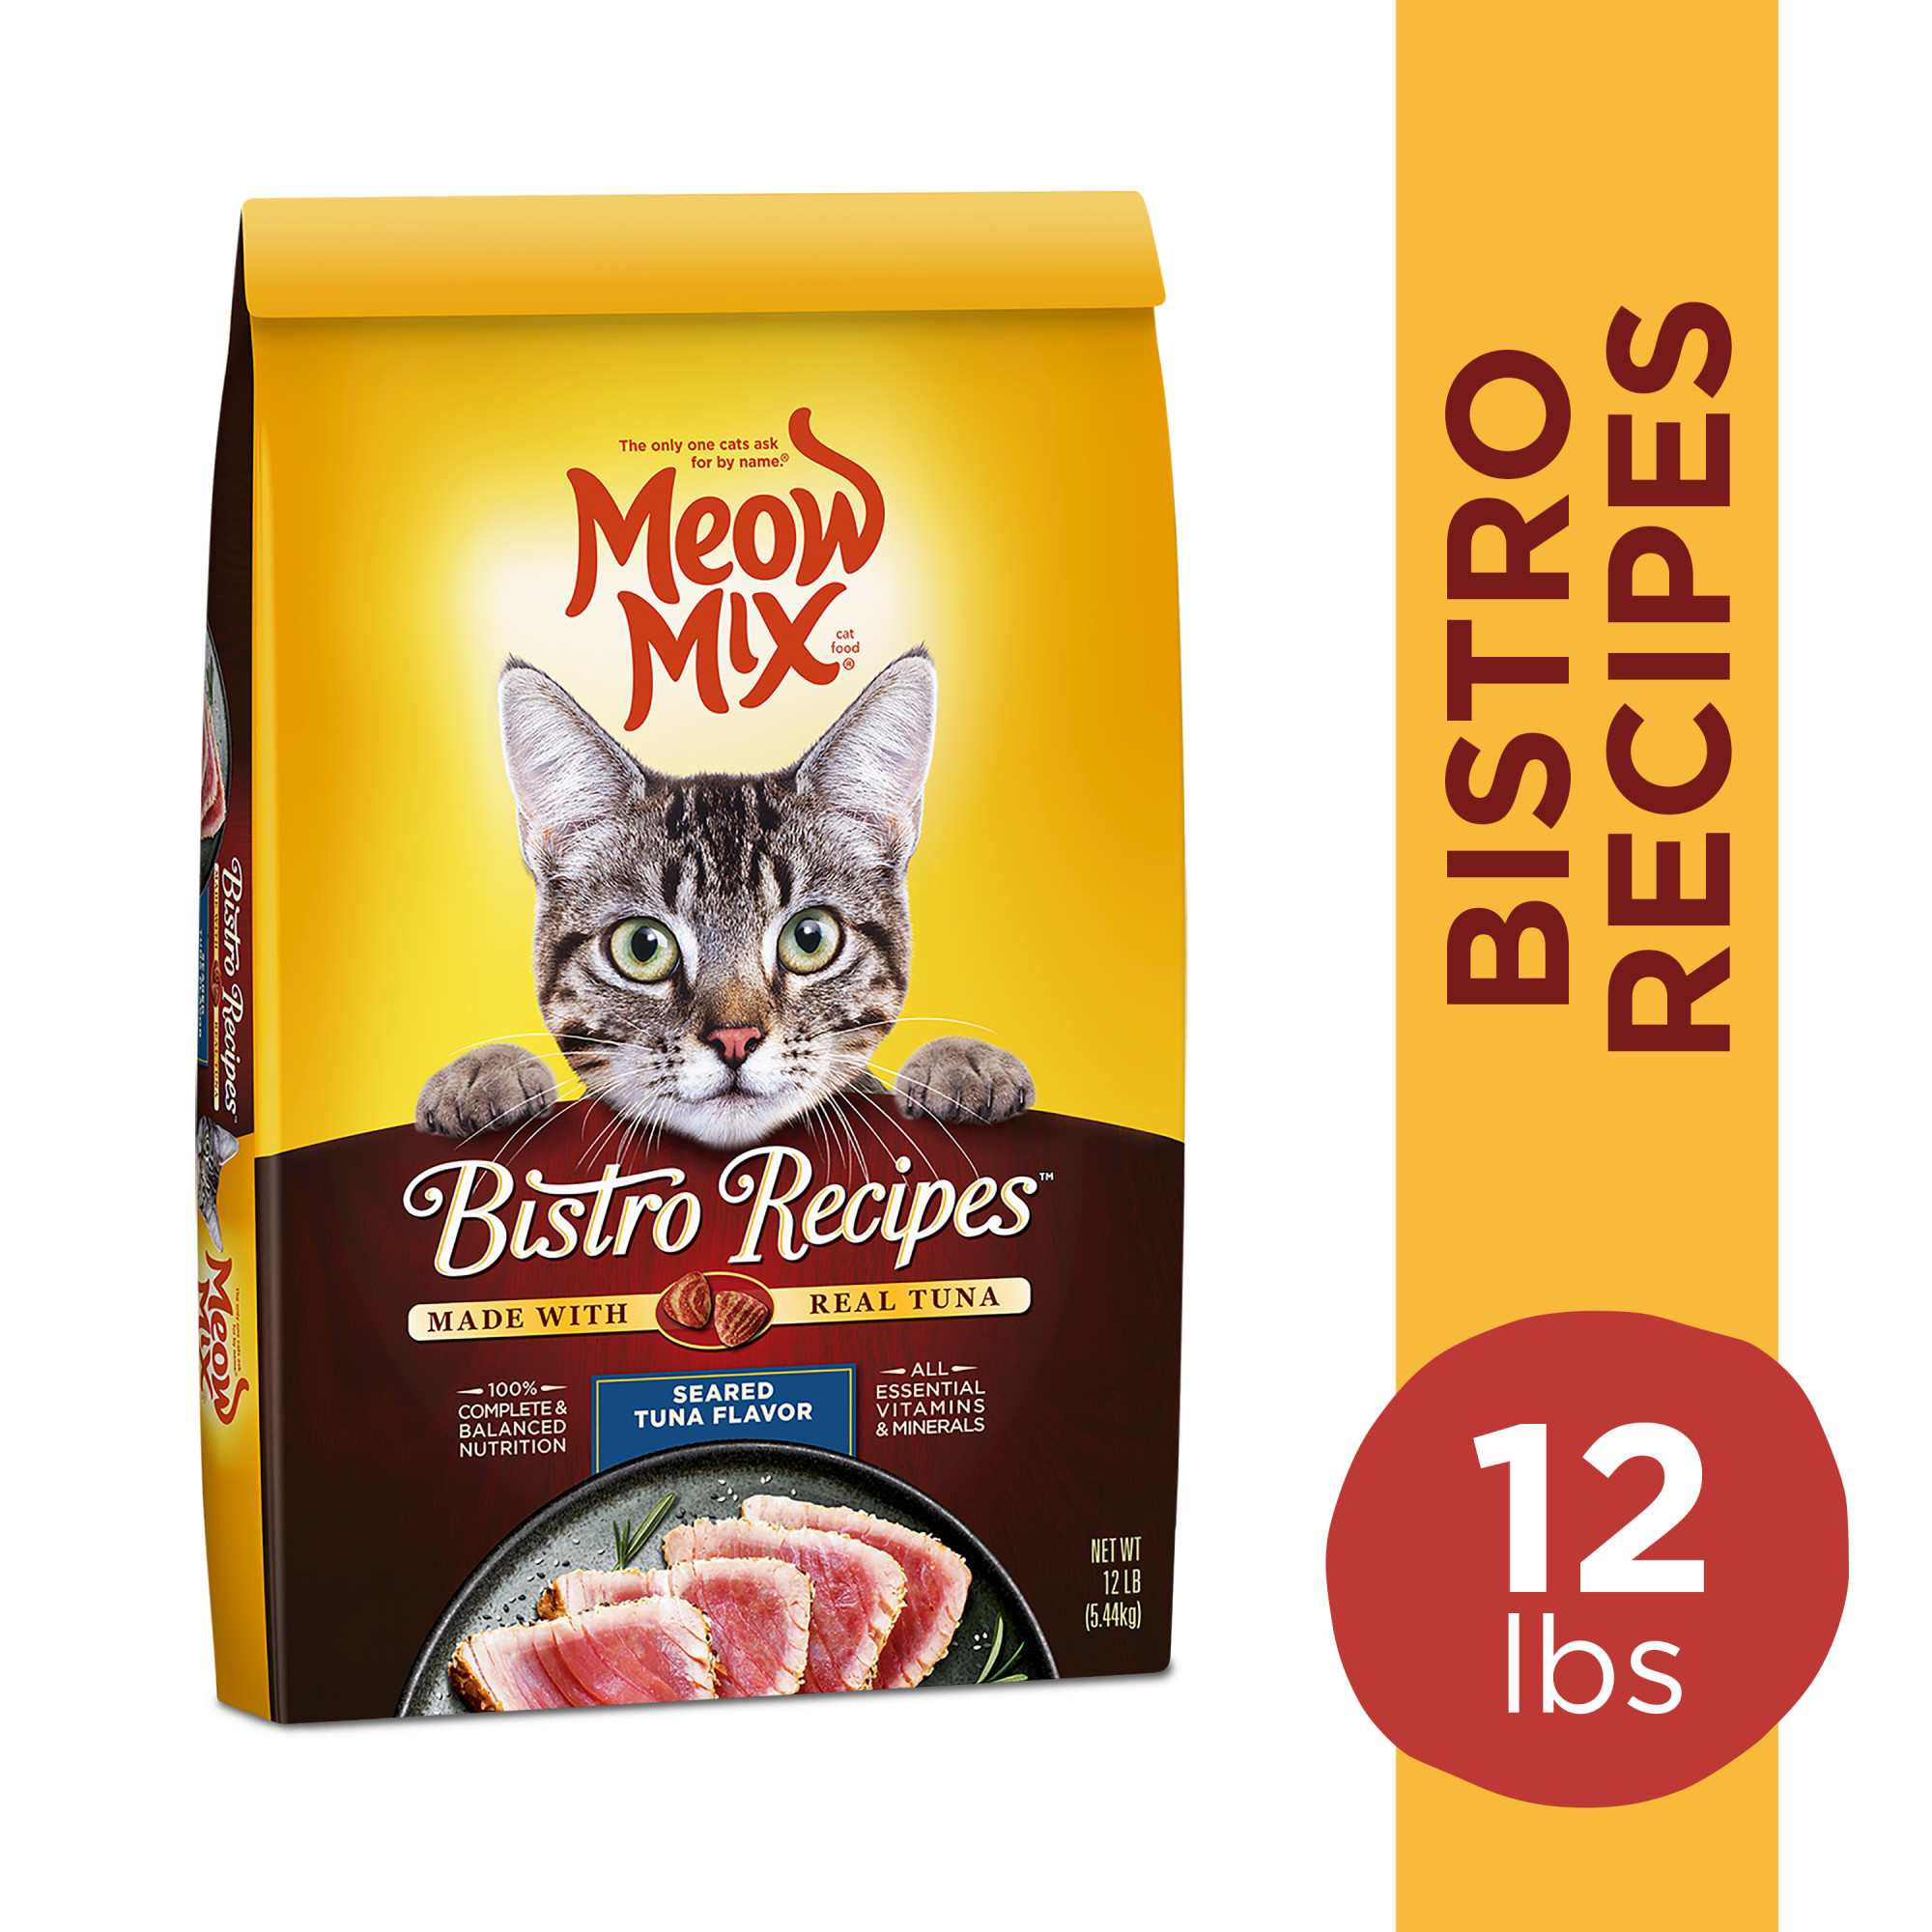 Meow Mix Bistro Recipes Seared Tuna Flavor Dry Cat Food - image 3 of 6